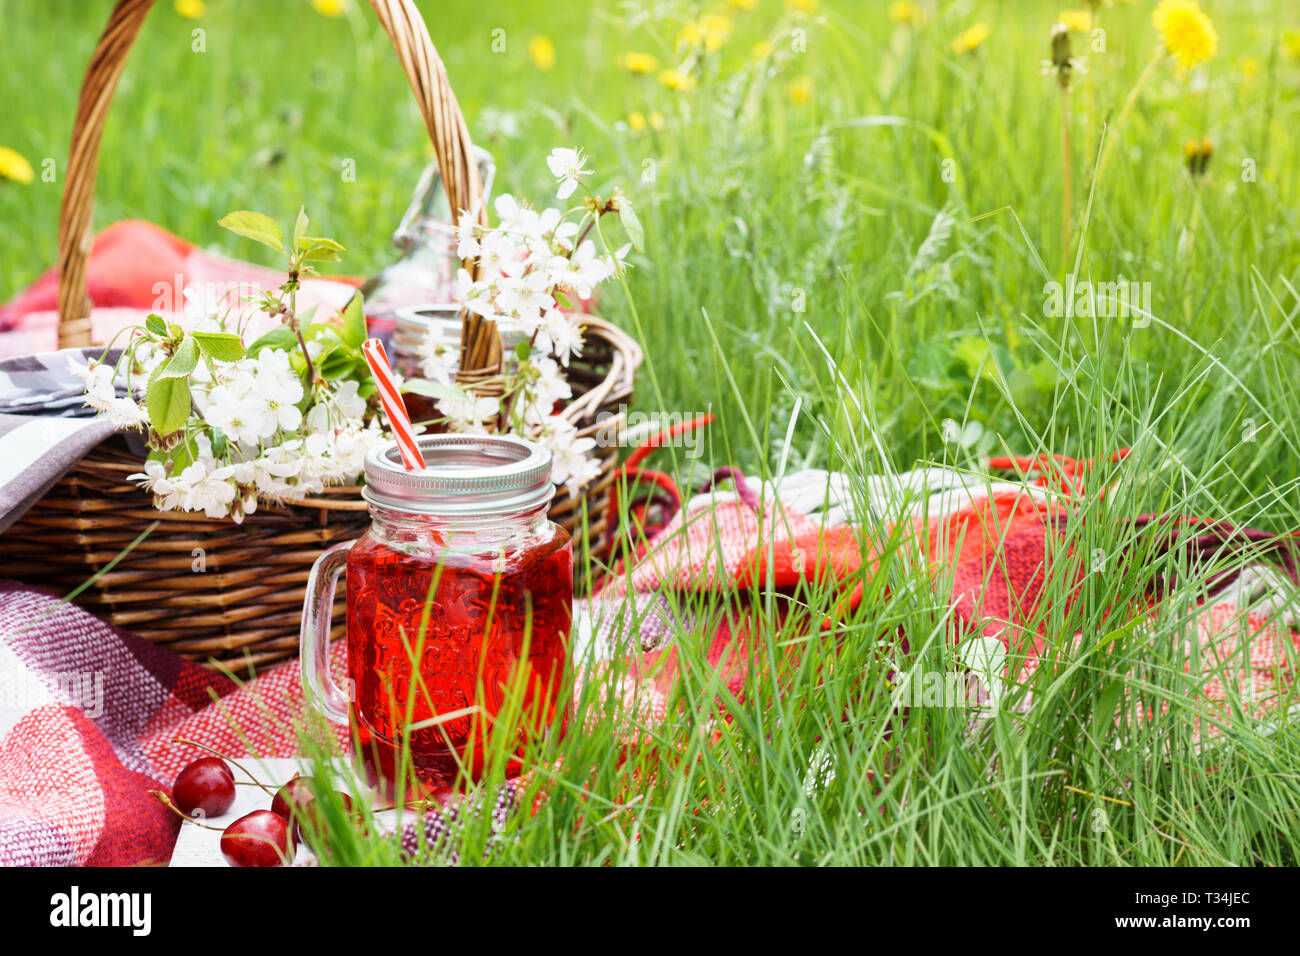 Cherry juice in a jar and wicker picnic basket with food on red blanket. Summer picnic on grass in a park. Stock Photo